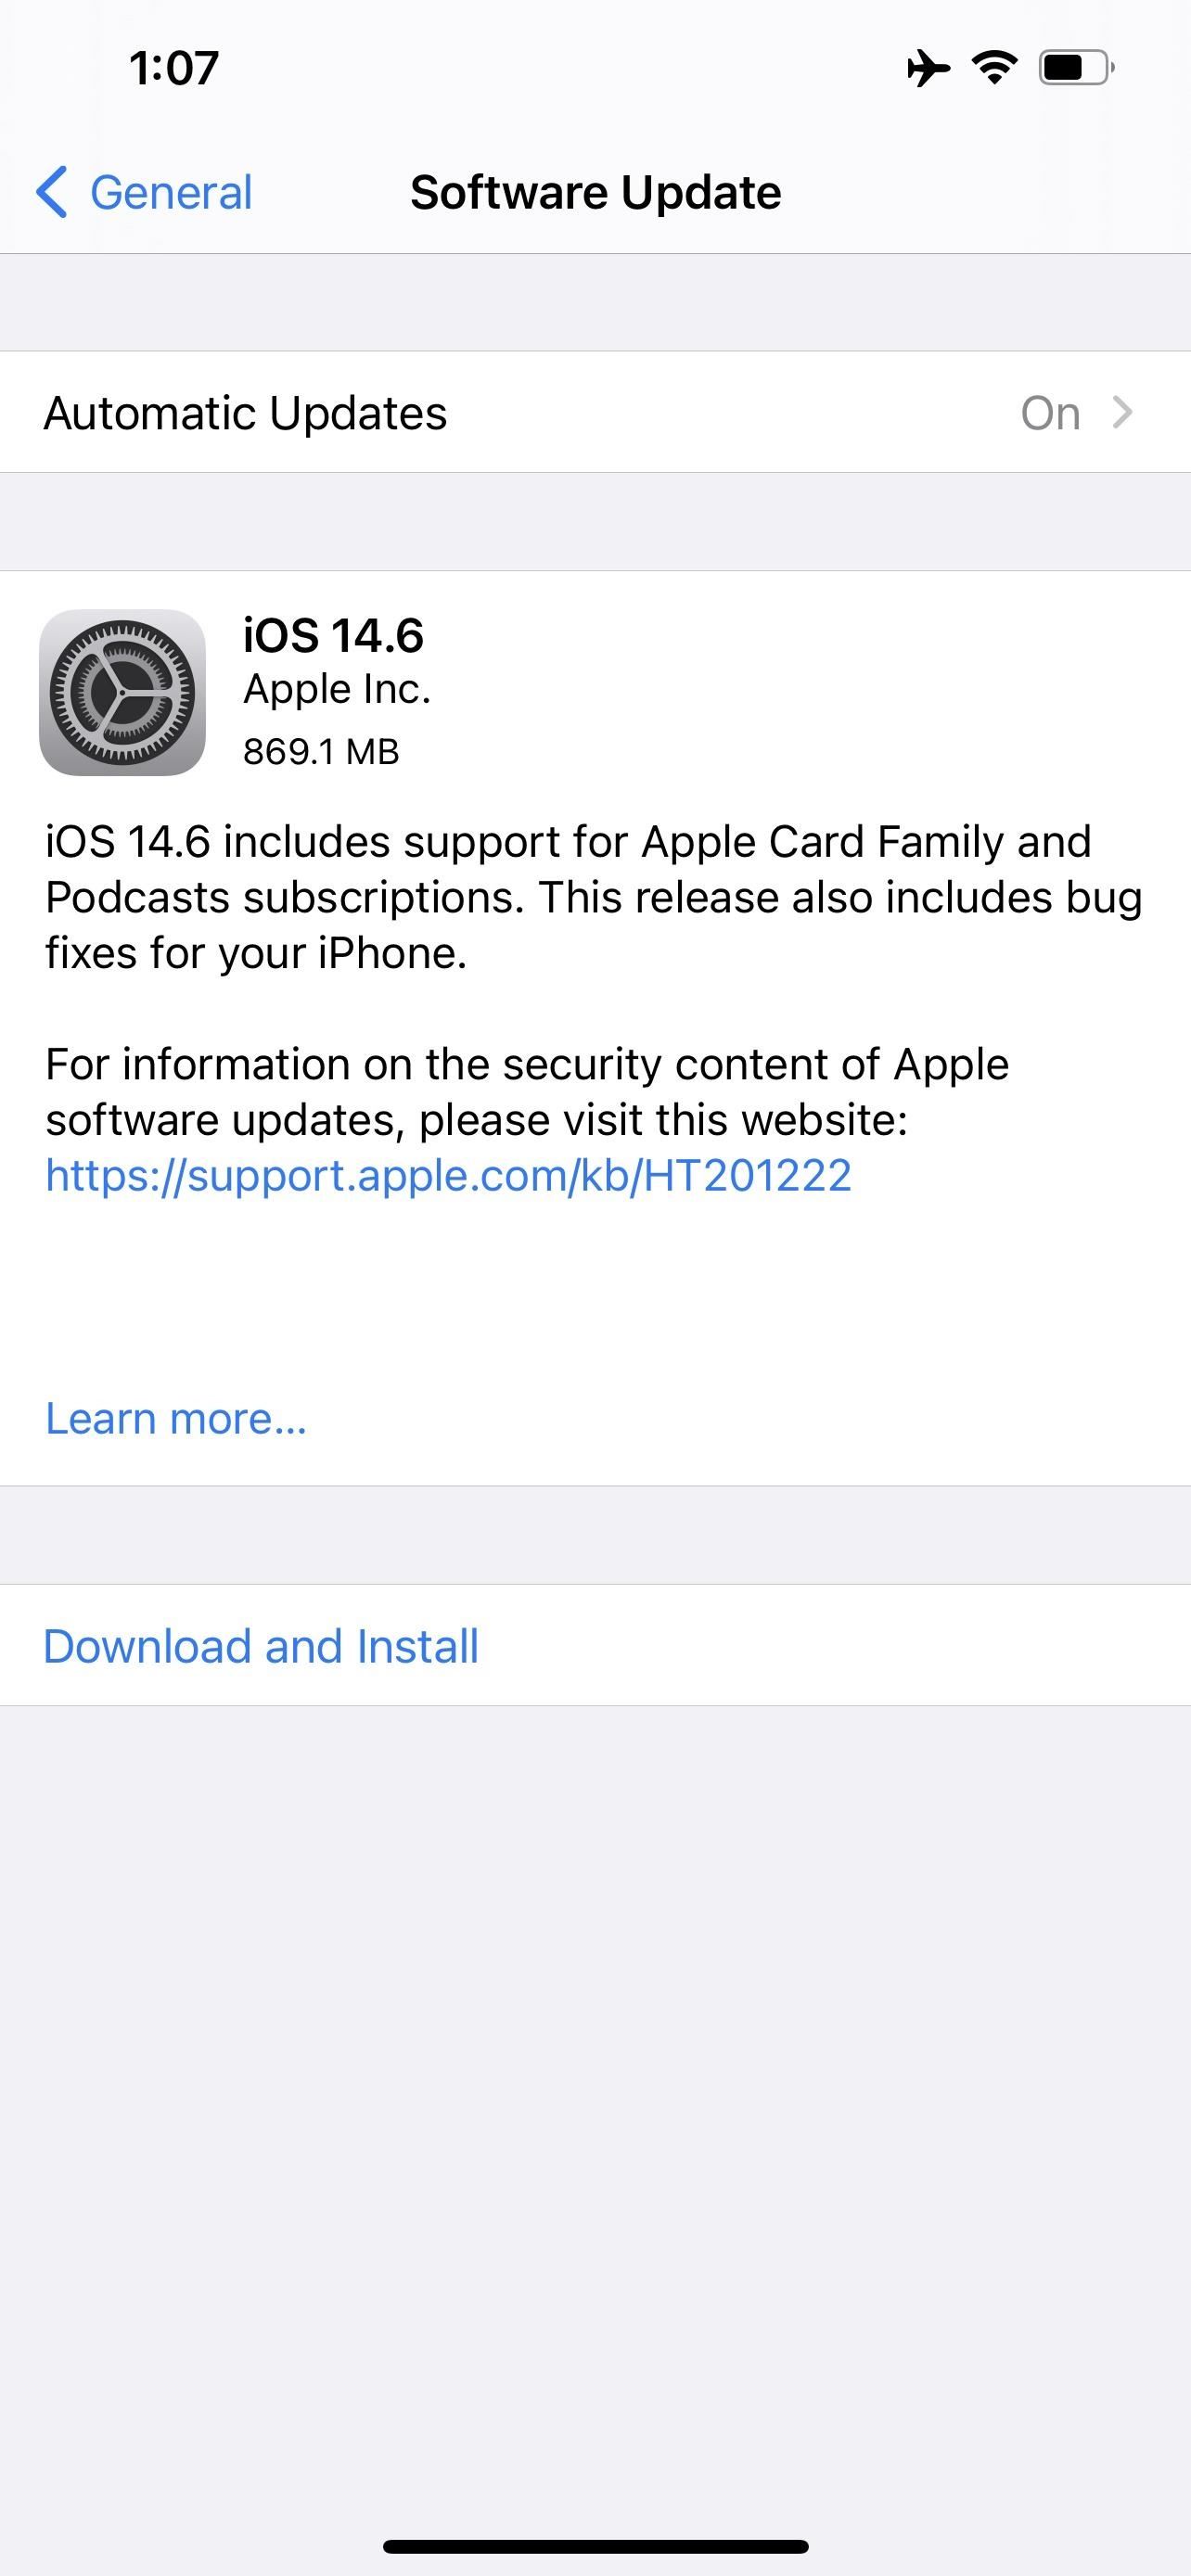 Apple Releases iOS 14.6 for iPhone, Introduces Voice Unlock After Restart, Apple Card Family, Podcast Subs & More